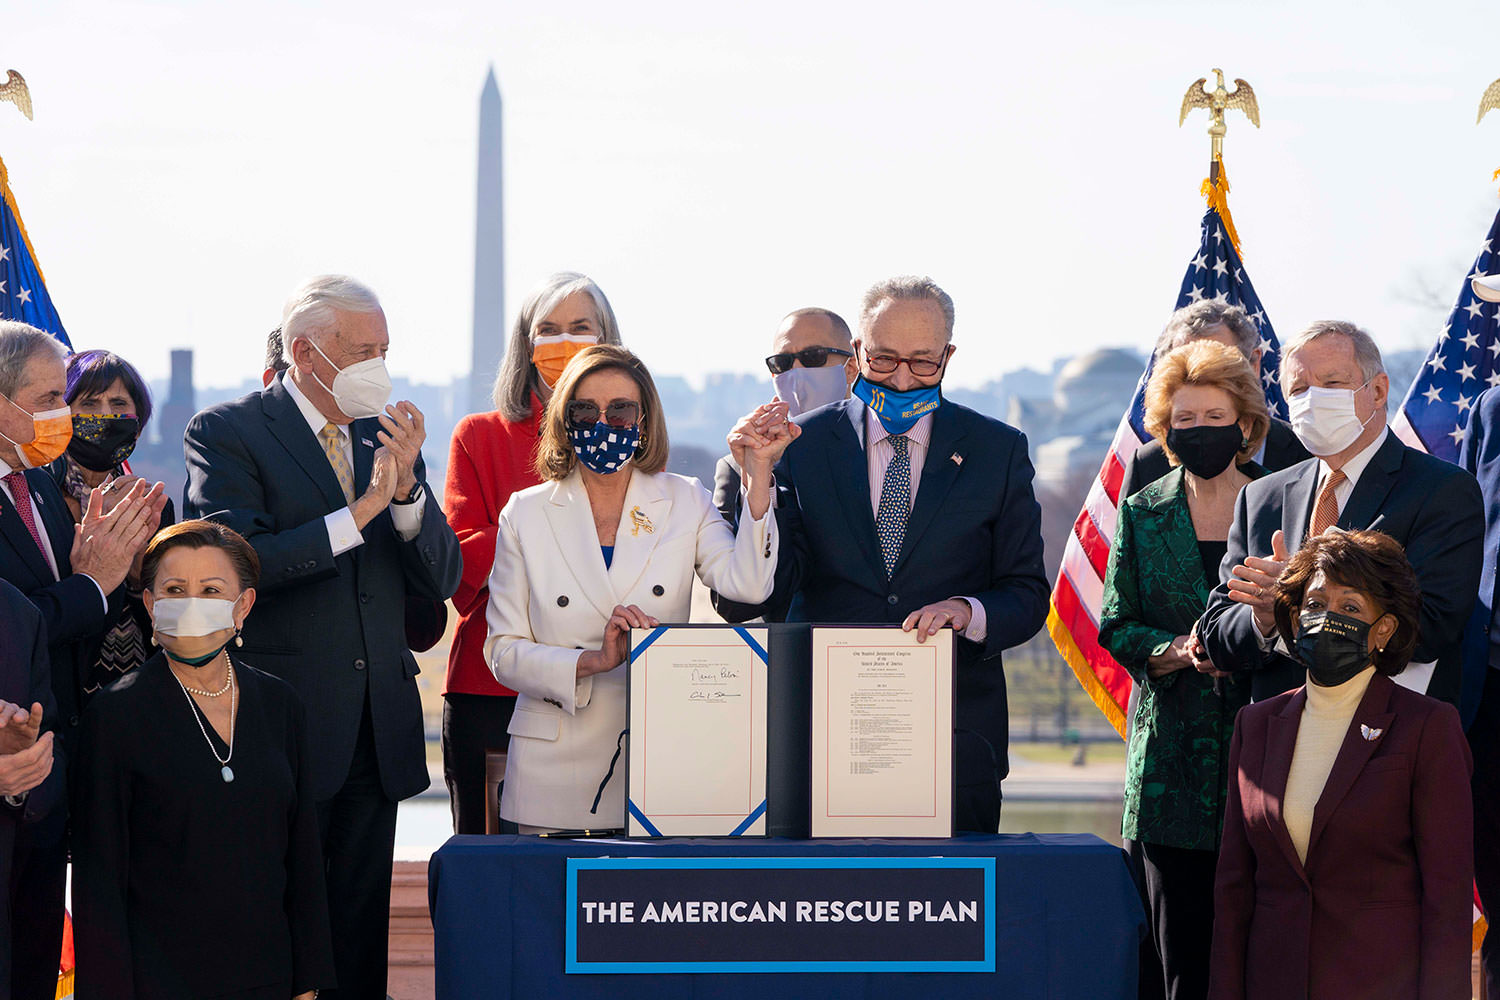 Senate Majority Leader Chuck Schumer (D-NY), Speaker of the House Nancy Pelosi (D-CA) and Democrats in Congress held an enrollment ceremony for H.R. 1319, the American Rescue Plan Act